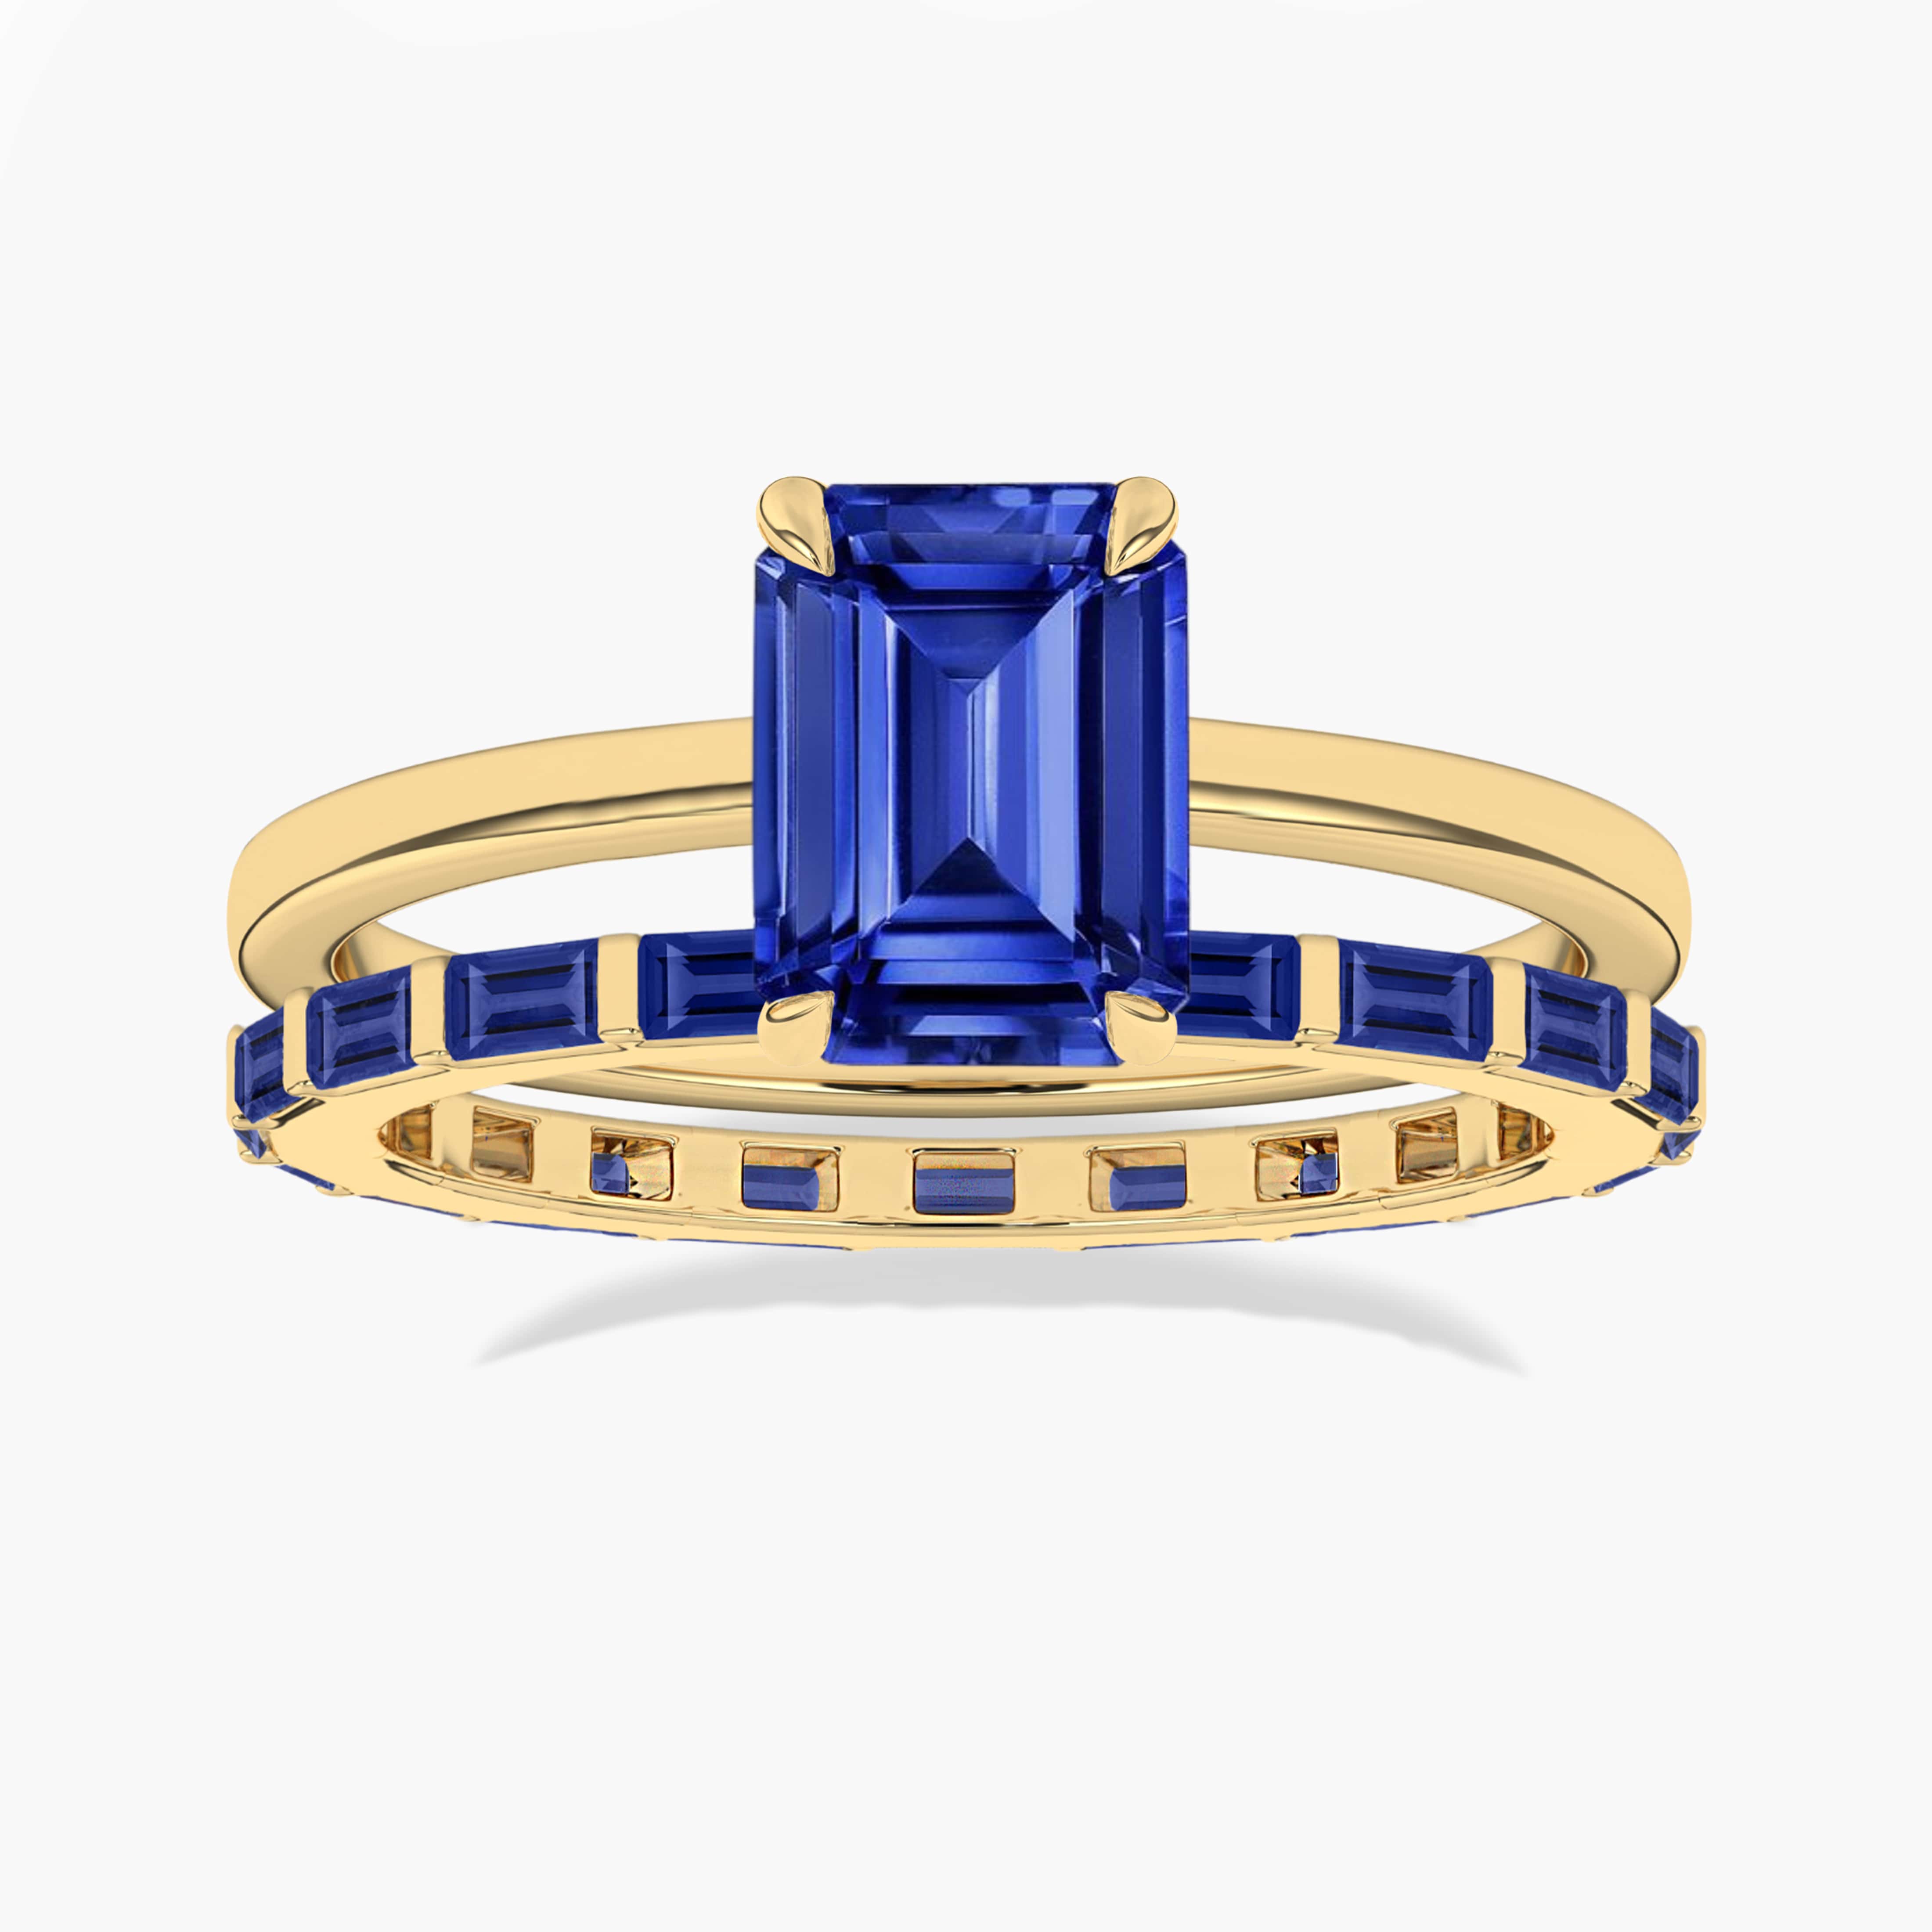 Blue Sapphire Emerald Cut Ring With Baguette Cut Eternity Band In Yellow Gold